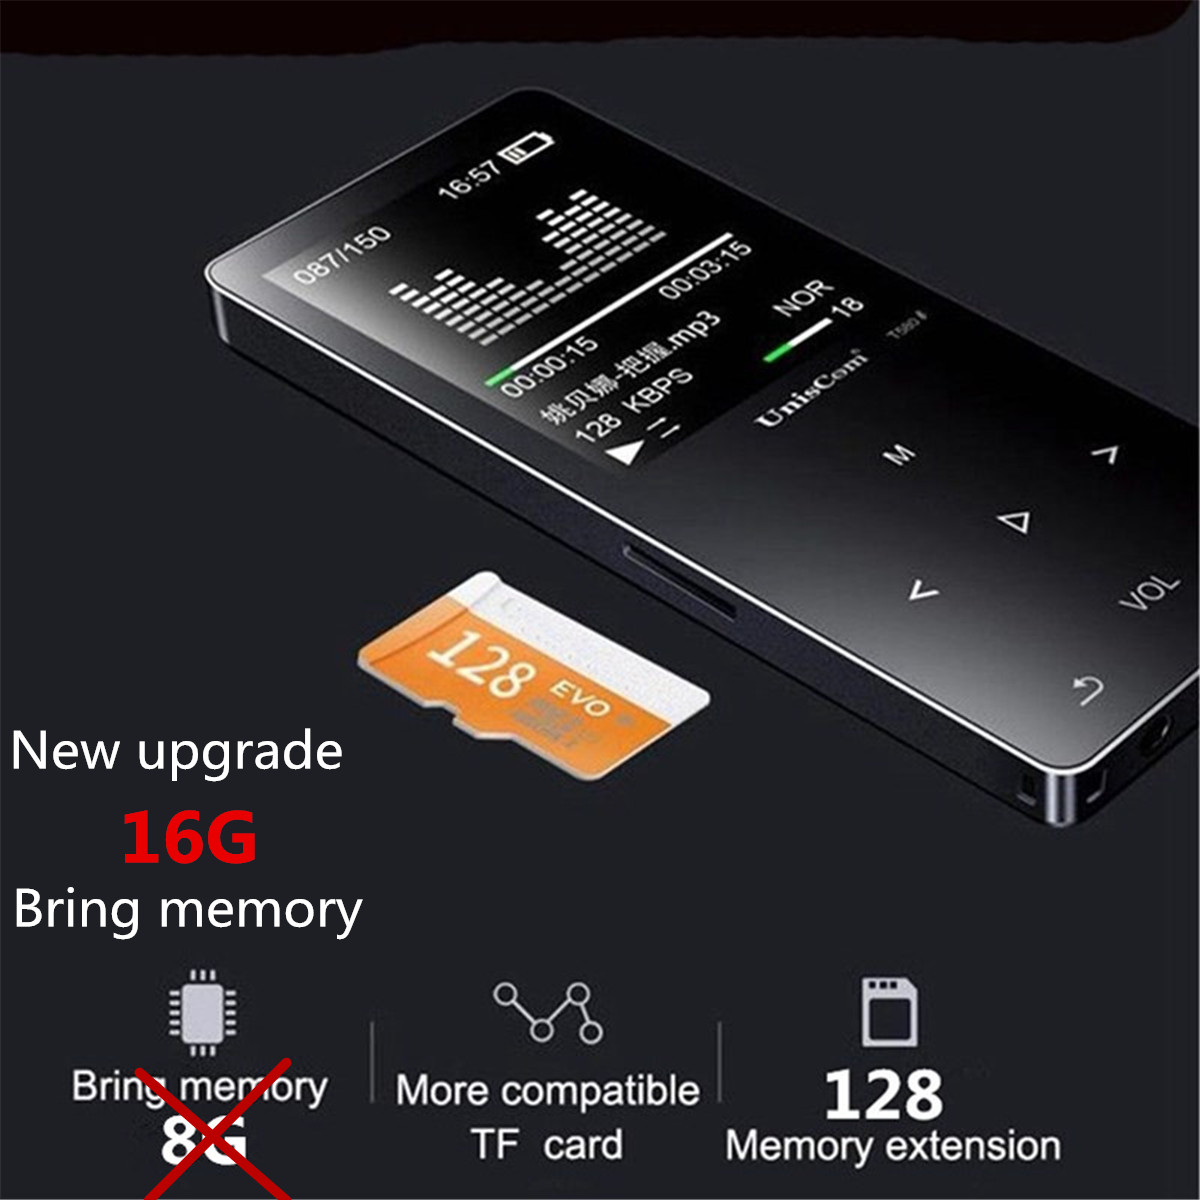 Uniscom 8G 1.8 Inch Screen bluetooth Lossless HIFI MP3 Music Player Support A-B Repeat Voice Record 28